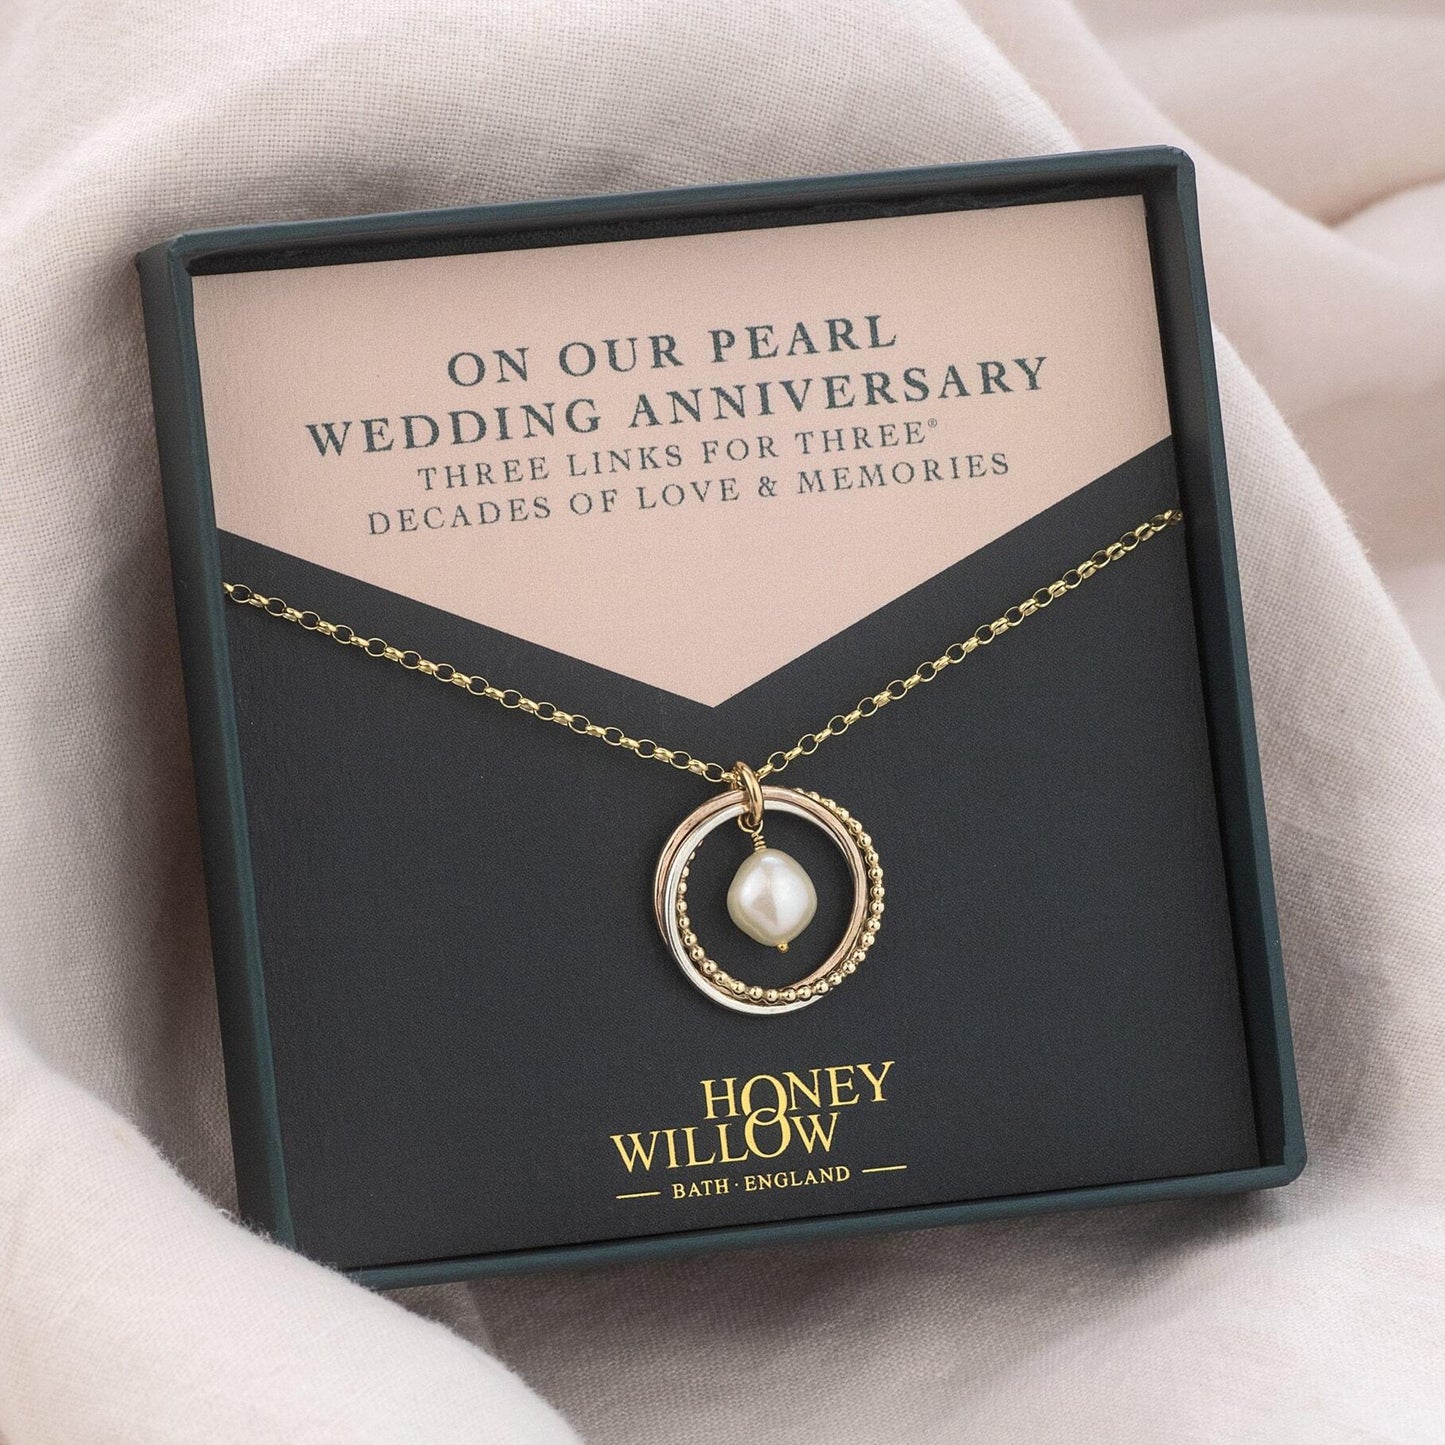 30th Wedding Anniversary Gift - 9kt Gold Pearl Wedding Anniversary Necklace